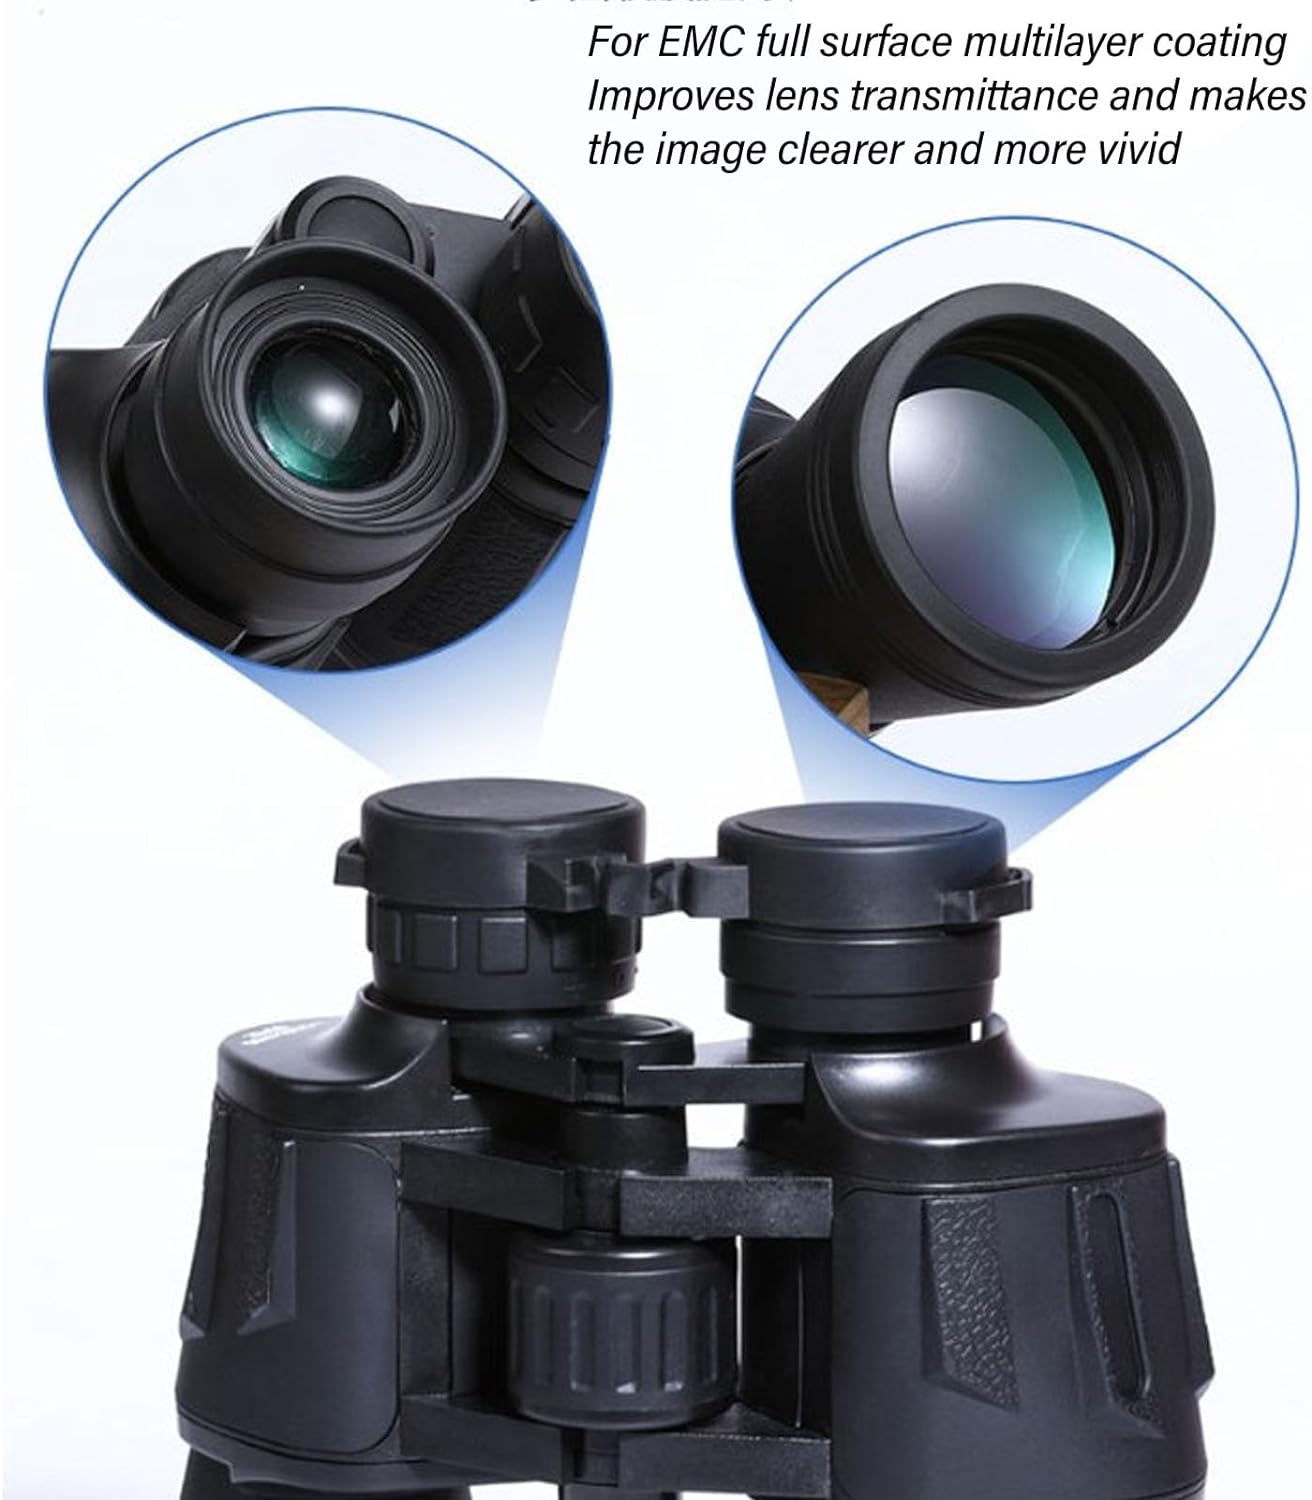 Super Bright 10x Zoom Lens Binoculars, Comfortable to Use, Large Objective Lens, Versatile Application for Bird Watching, Concerts